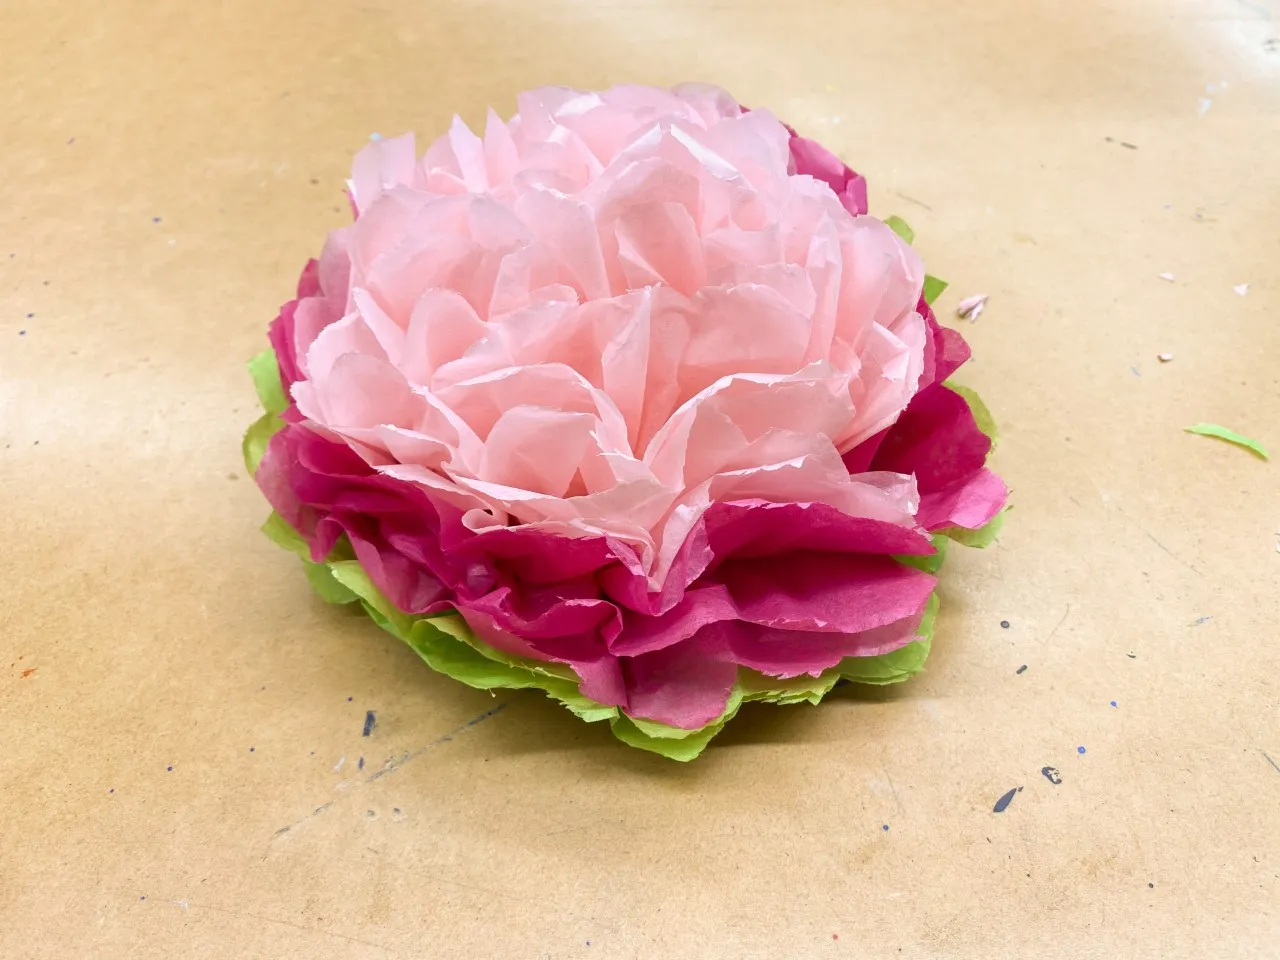 Completed tissue paper flower